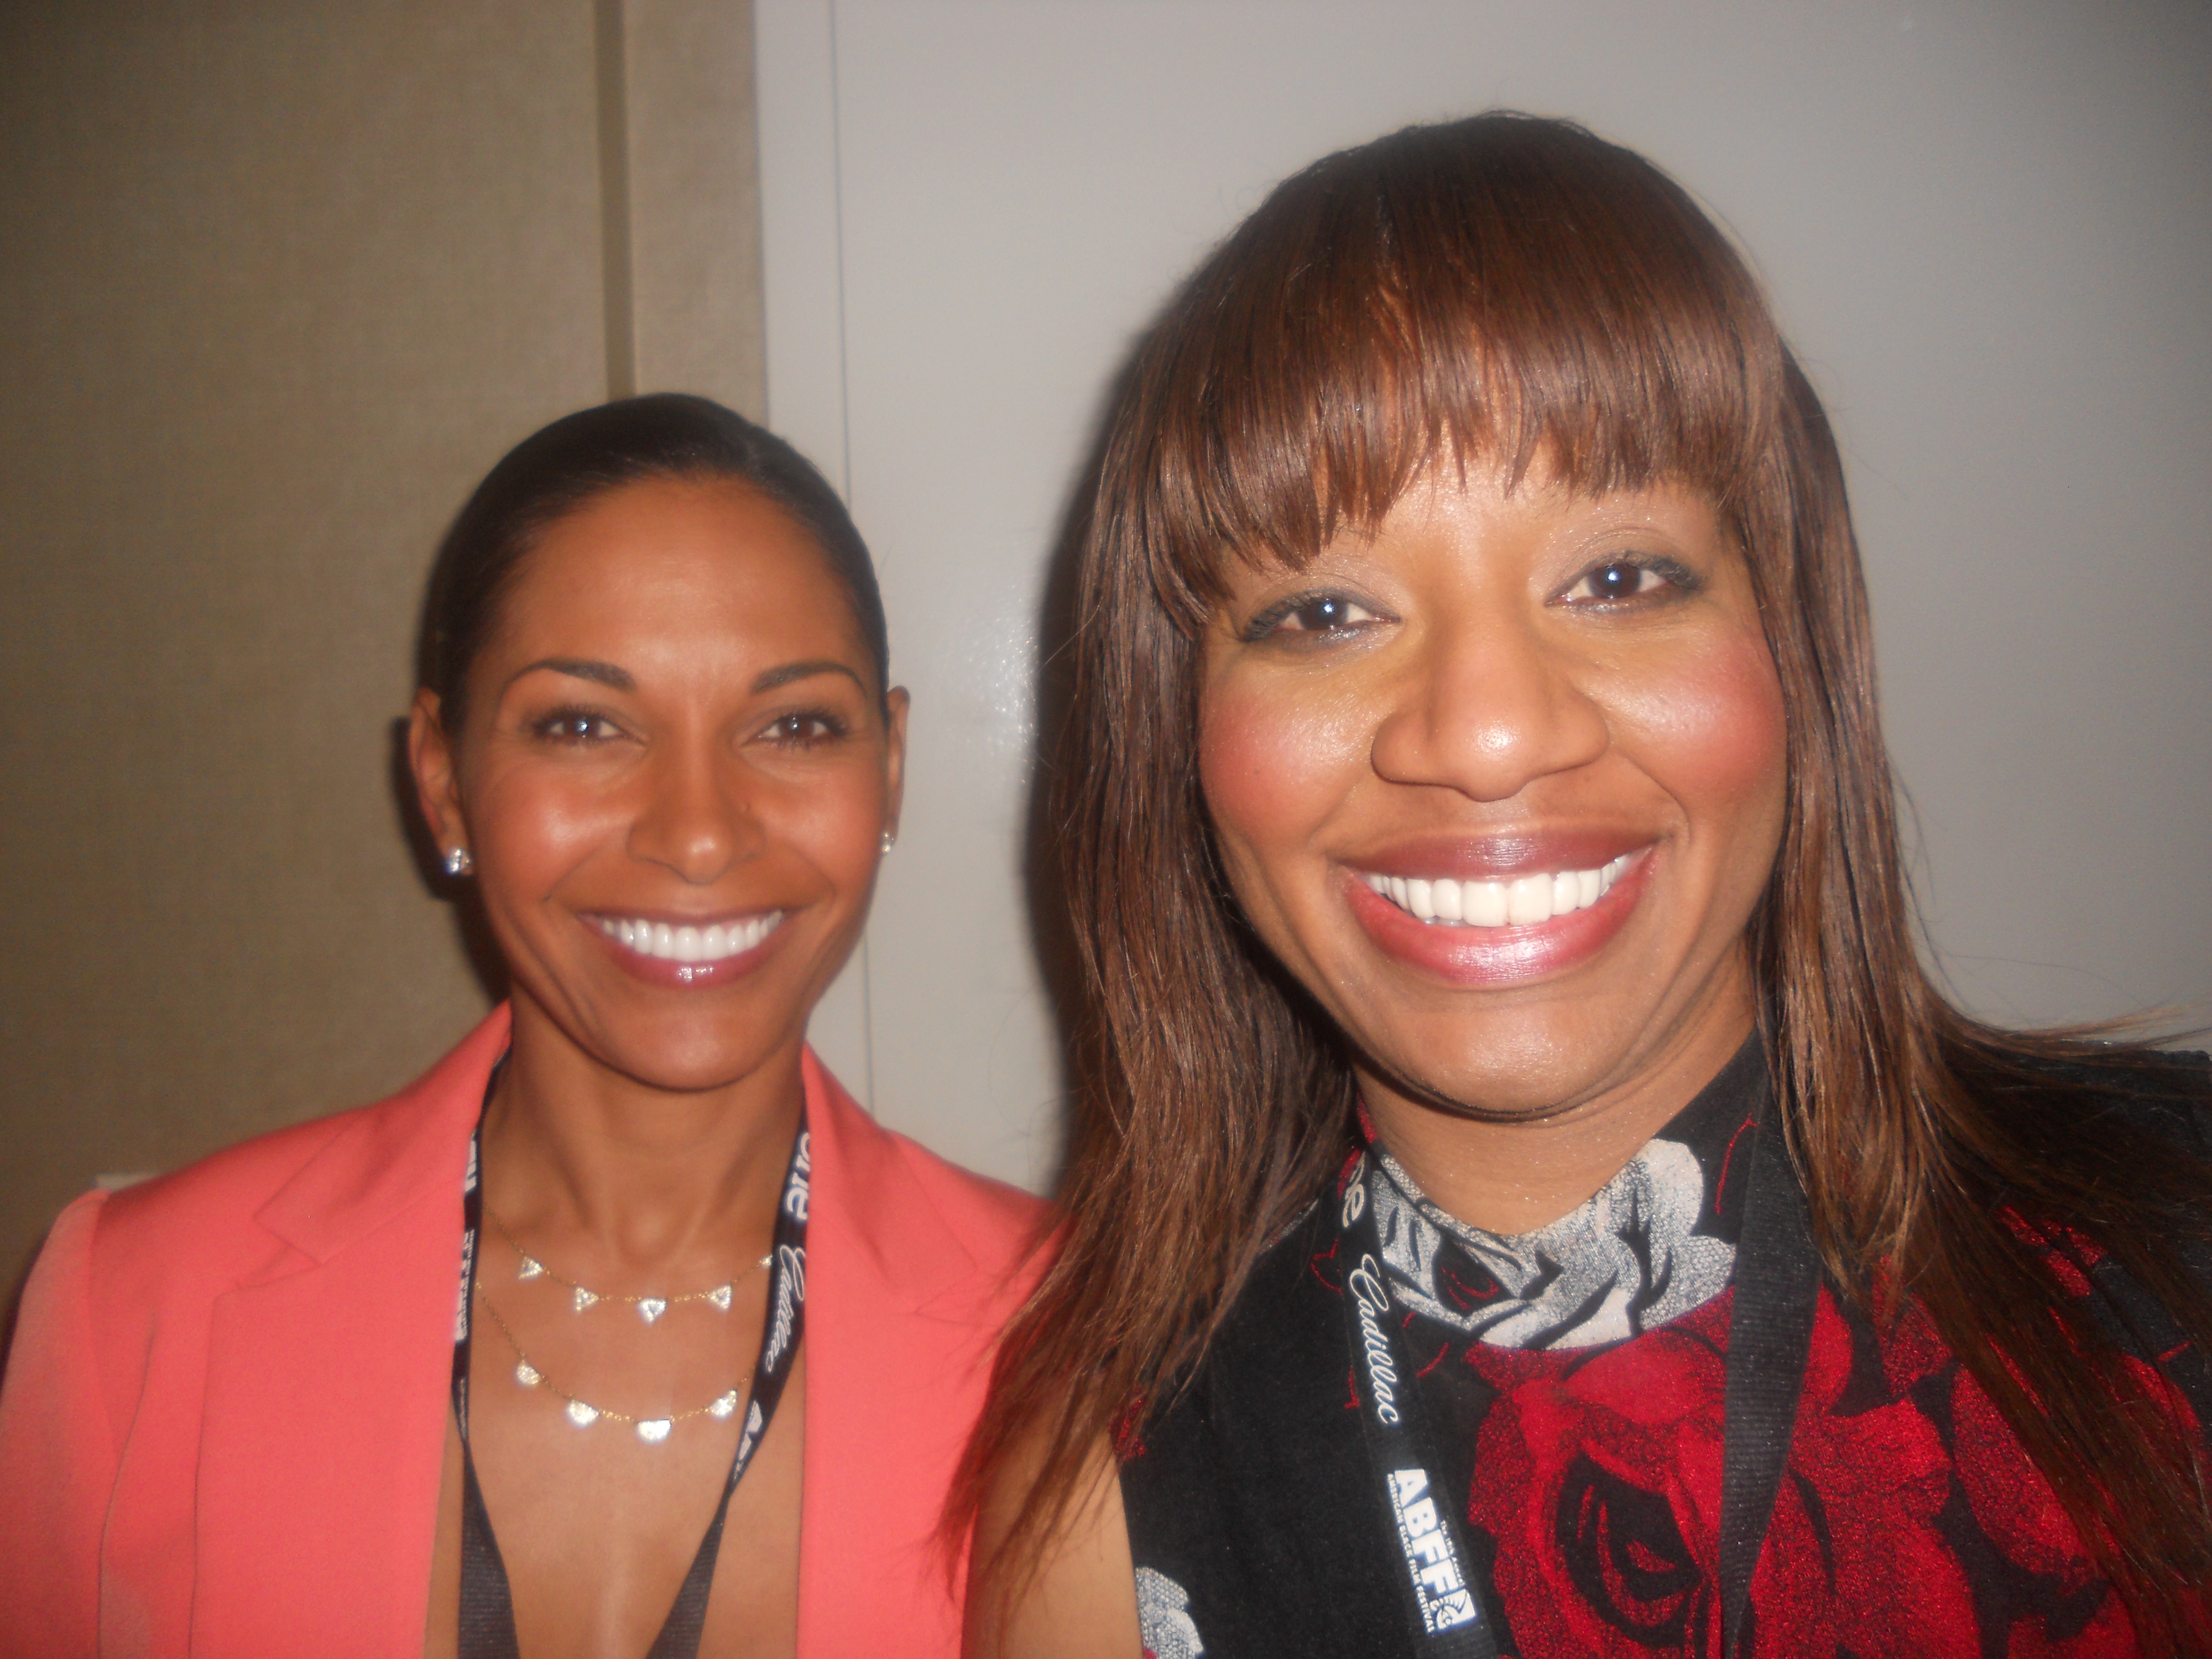 Nicole takes a photo with actress Salli Richardson-Whitfield at the American Black Film Festival